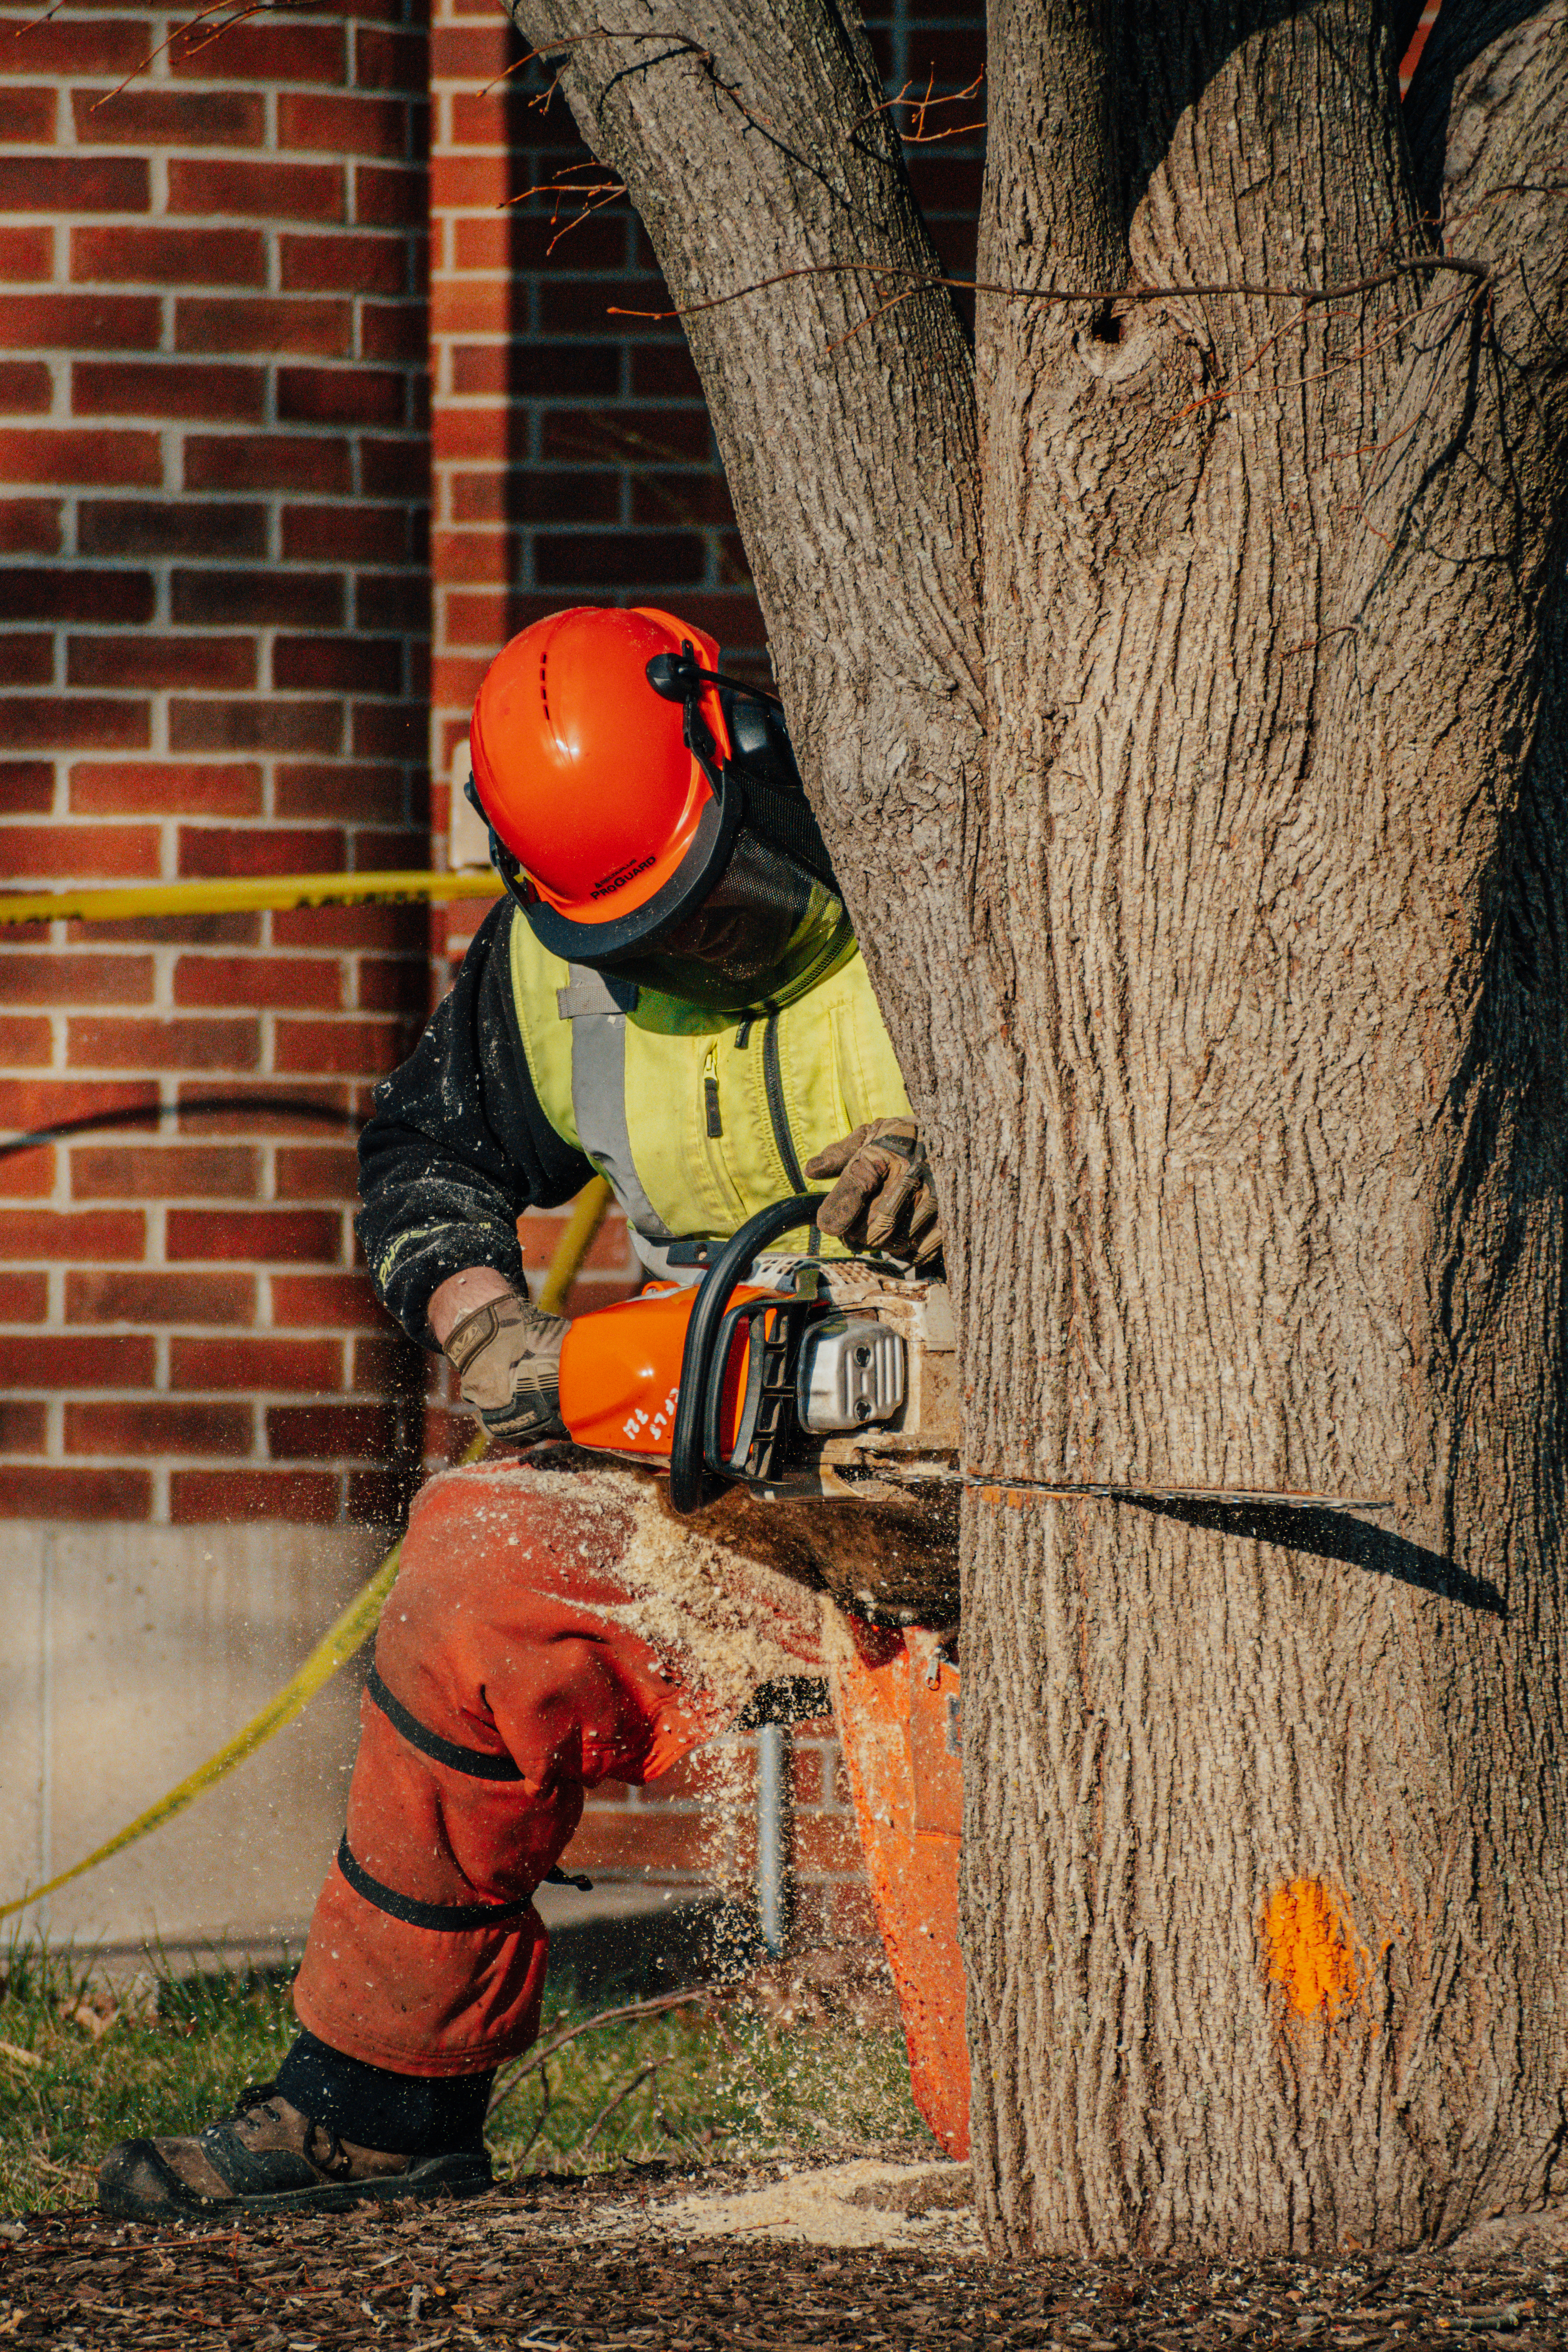 MU Landscape Services works to remove diseased and damaged trees growing on the Arts & Science Mall March 28, 2022